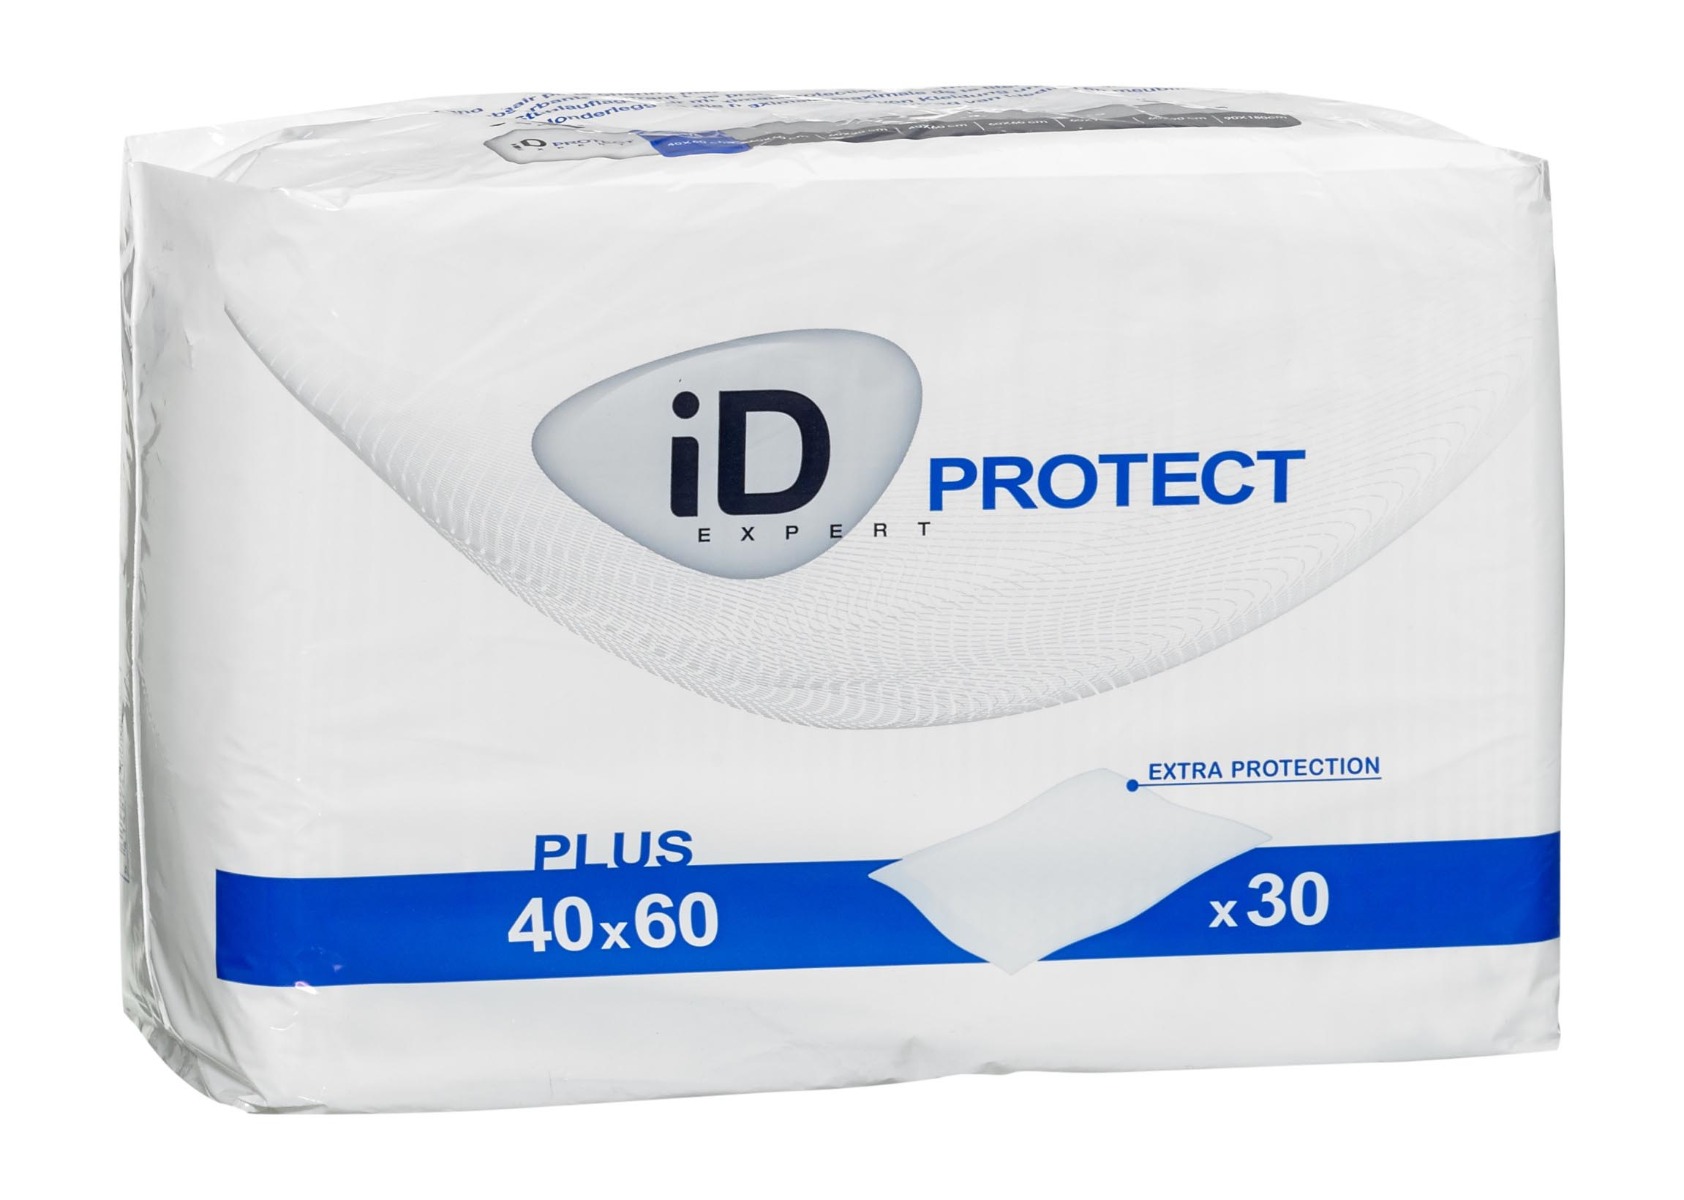 iD Expert Protect